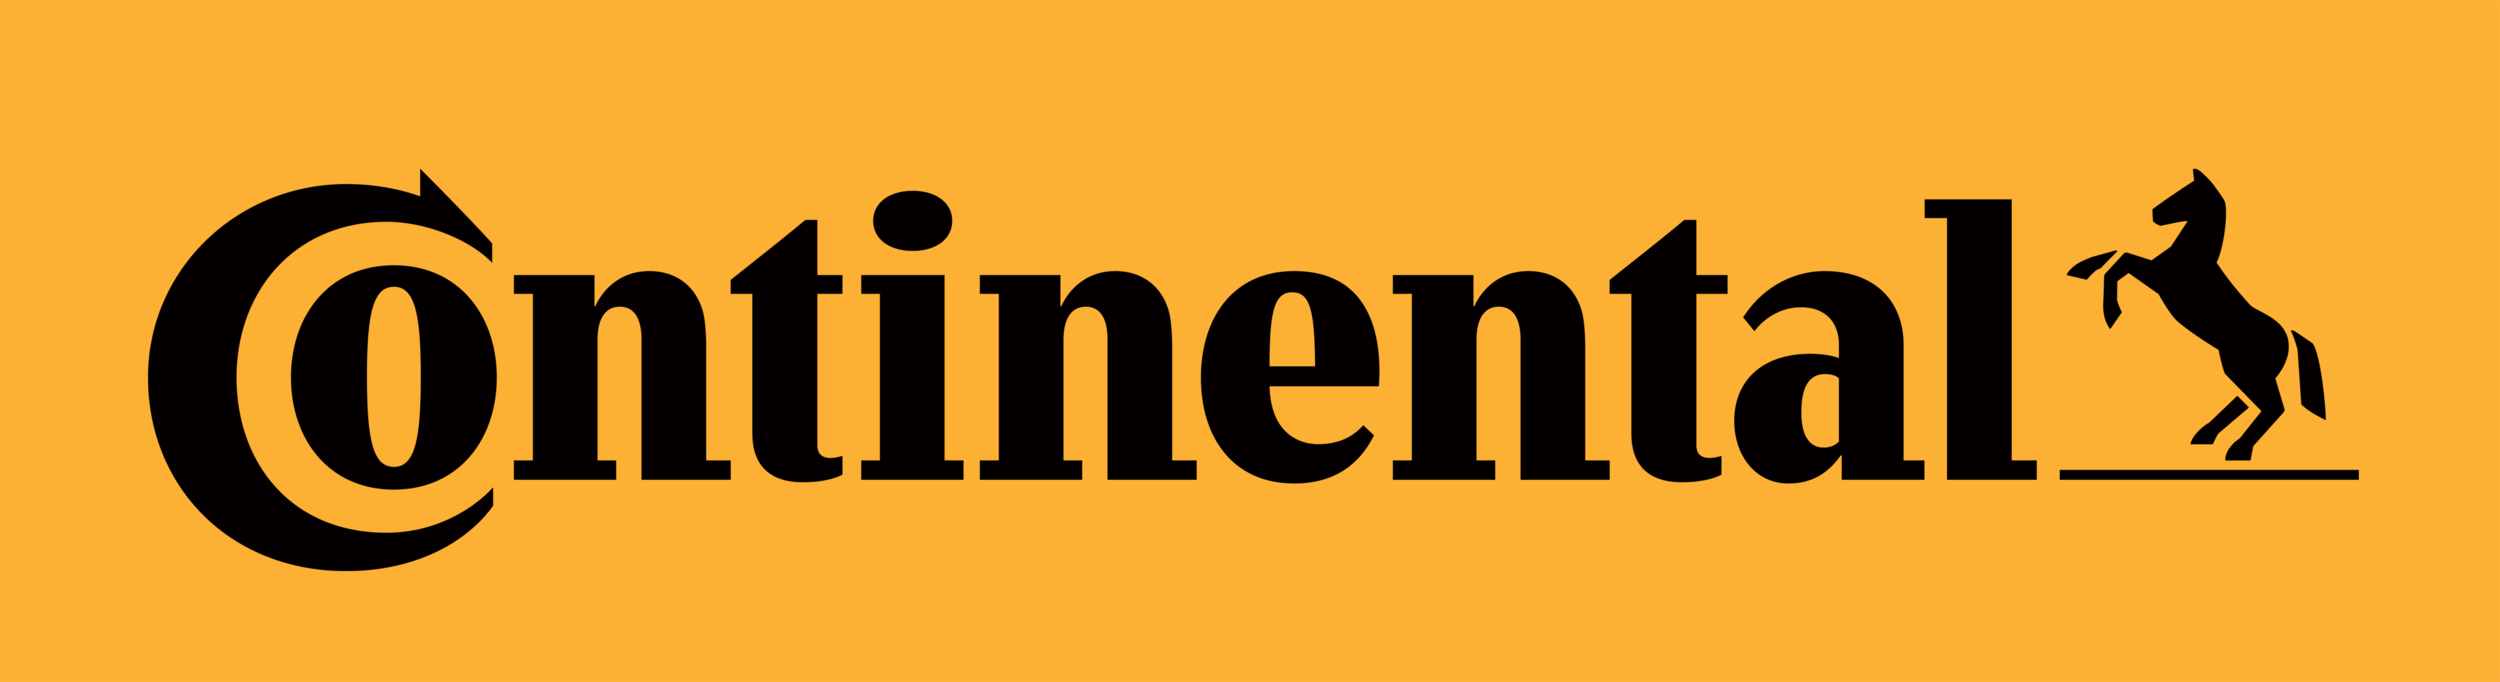 continental-logo-black-on-gold.png